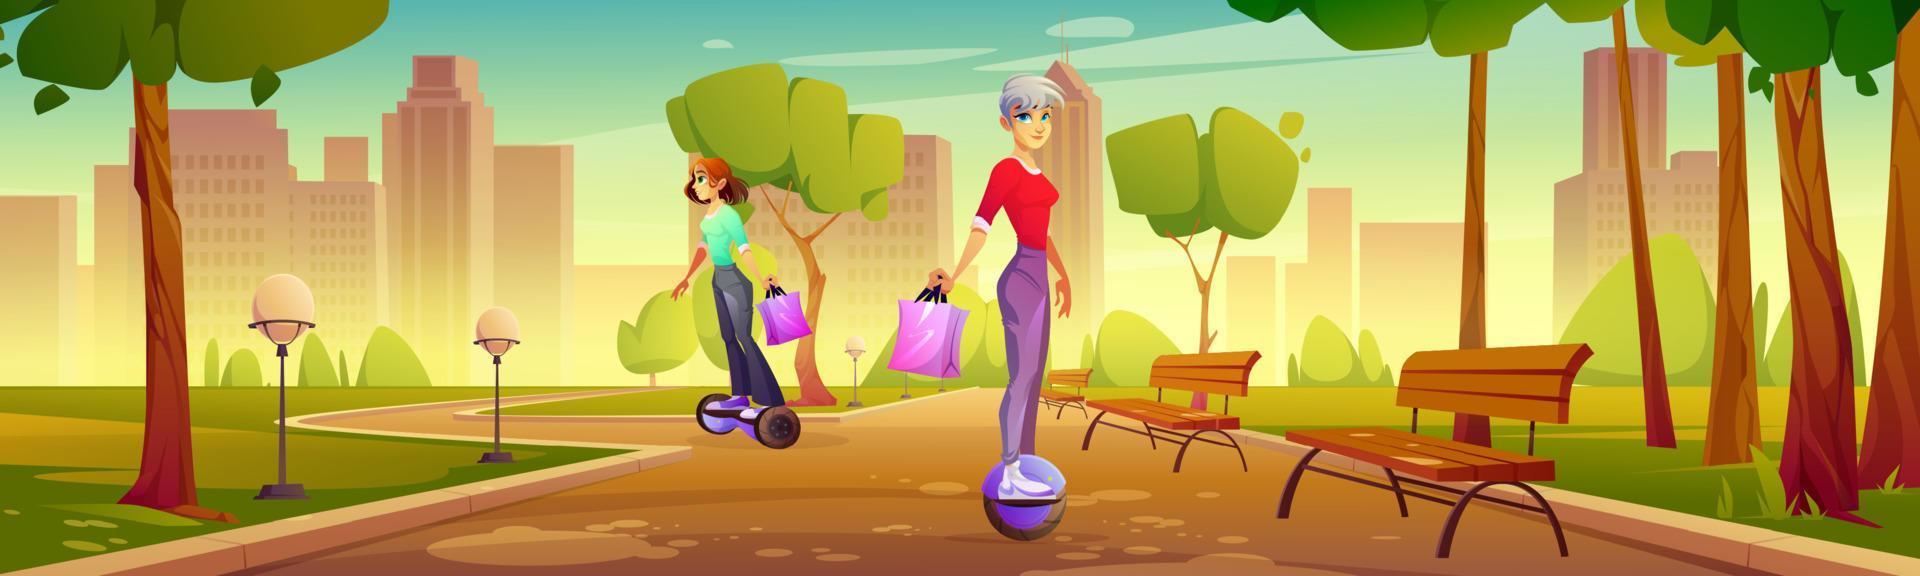 Girls ride on electric hoverboard and mono wheel vector